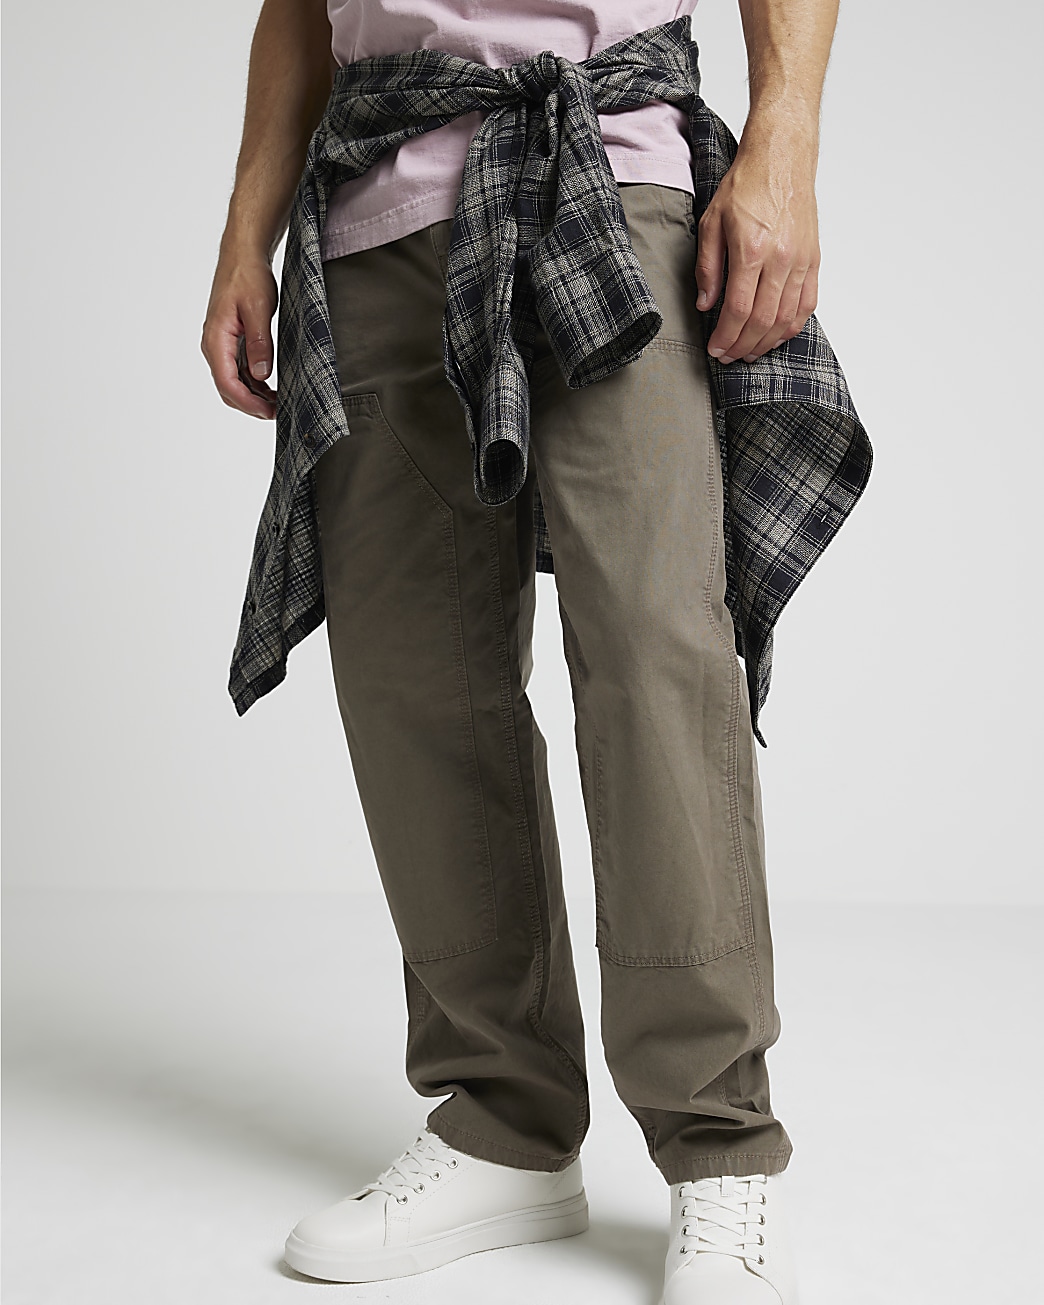 Visual filter display for Trousers